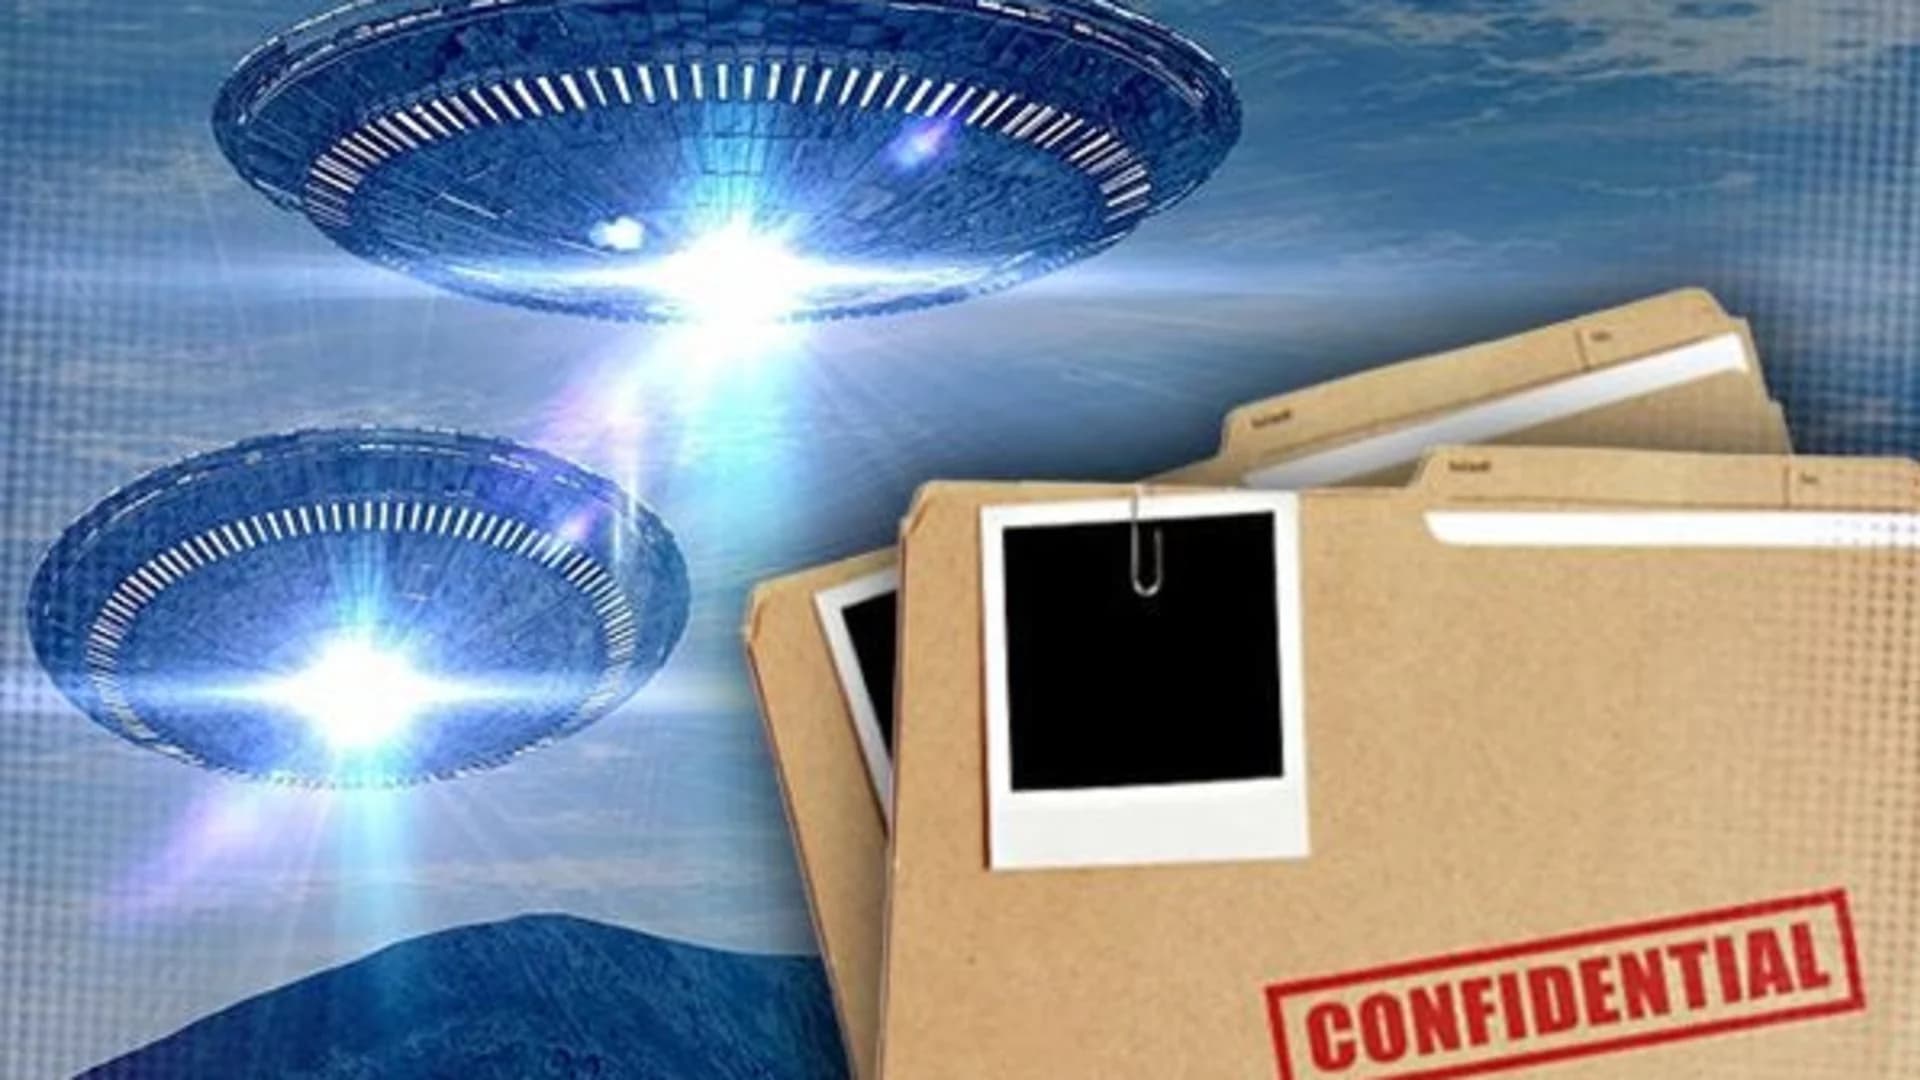 Facebook event participants vow to ‘storm Area 51’ in search of aliens